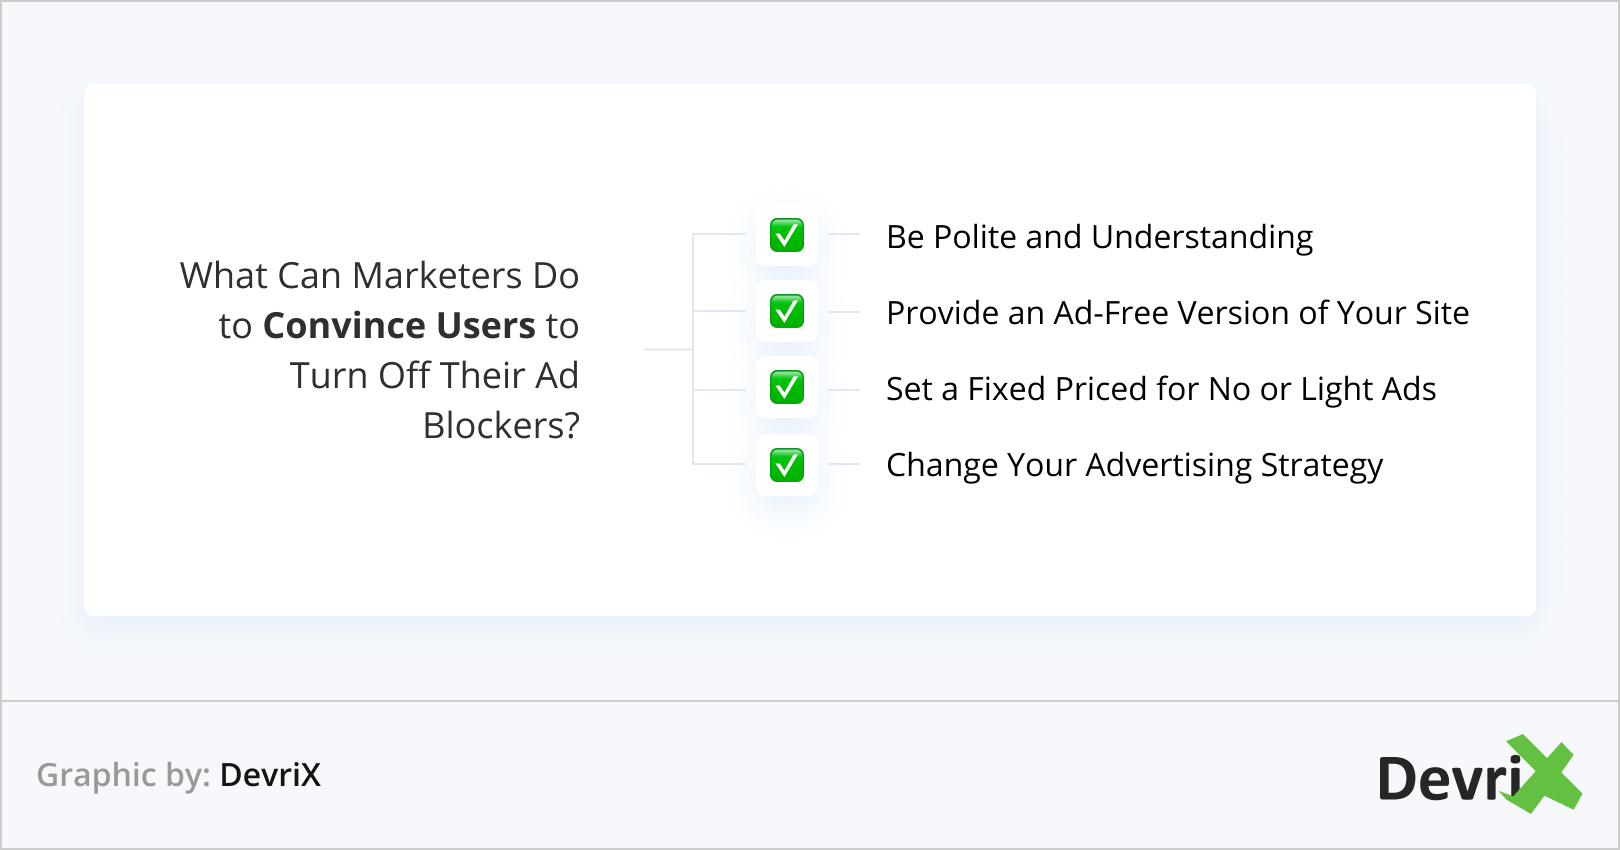 List of strategies for marketers to encourage users to disable ad blockers, including politeness, offering ad-free site versions, fixed pricing for fewer ads, and changing advertising strategy.